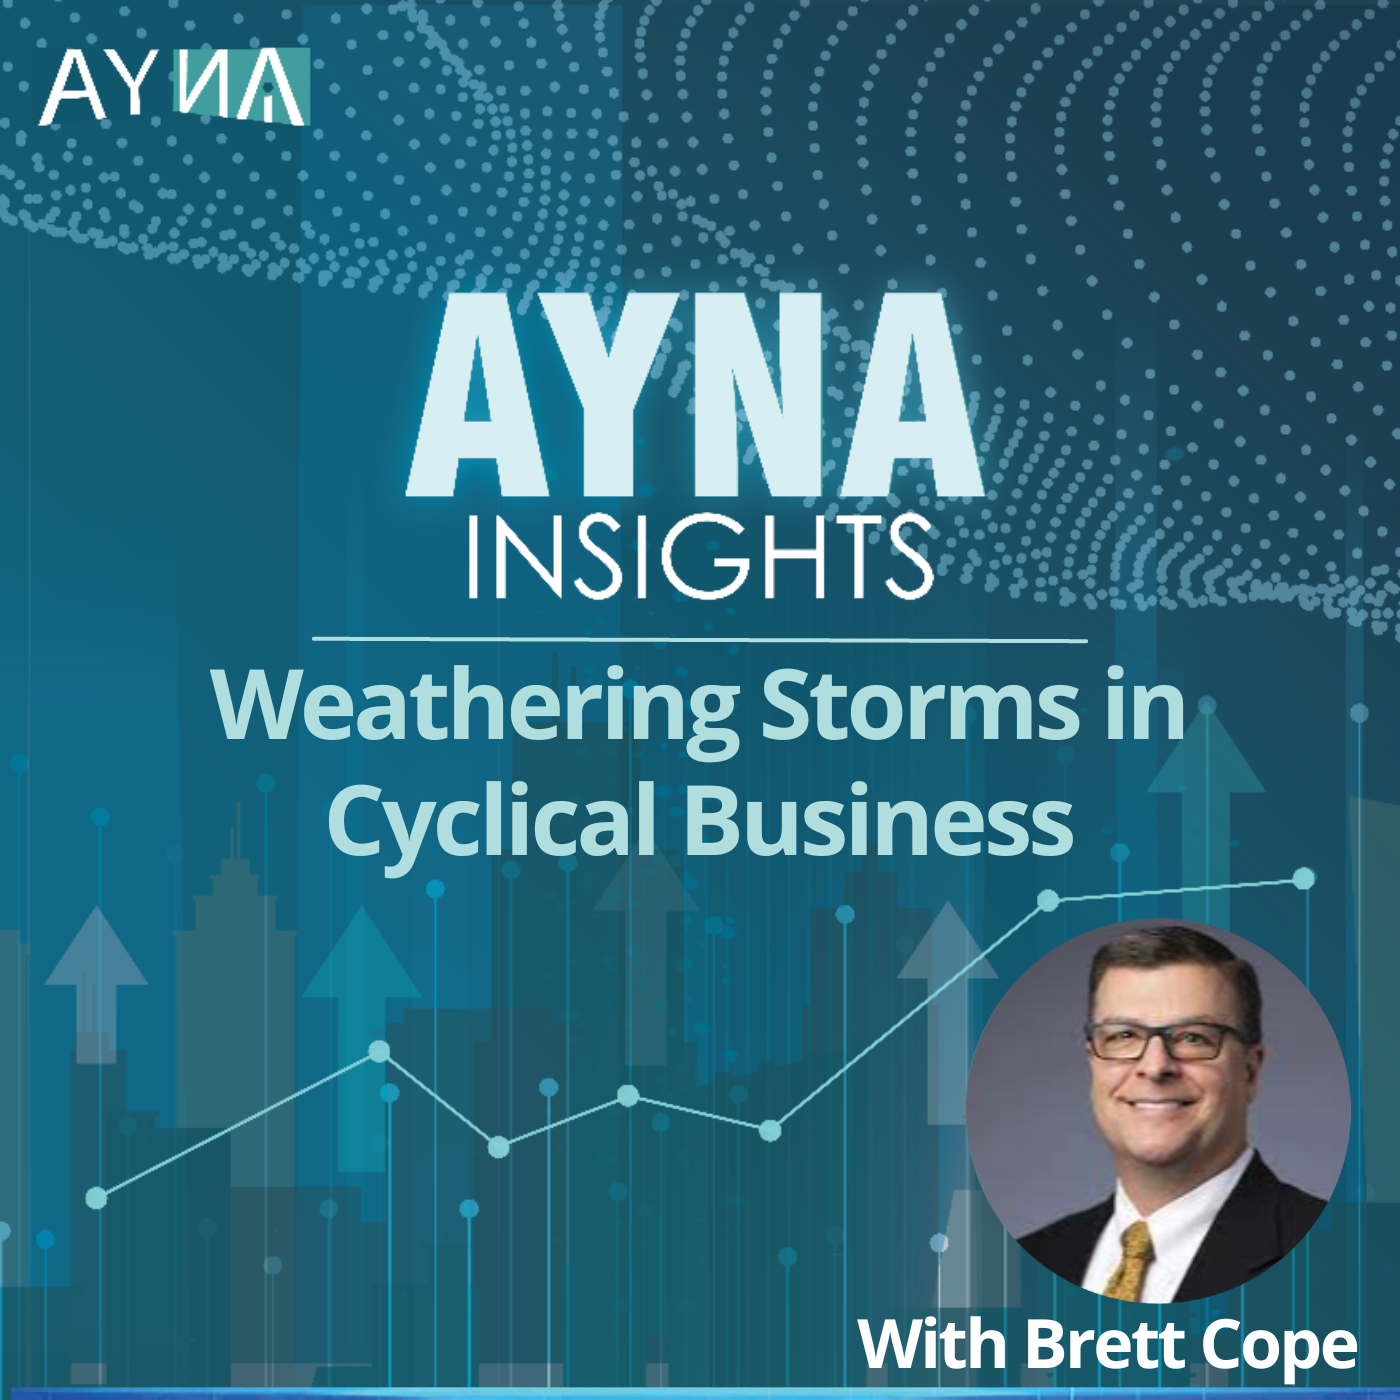 Brett Cope: Weathering Storms in Cyclical Business